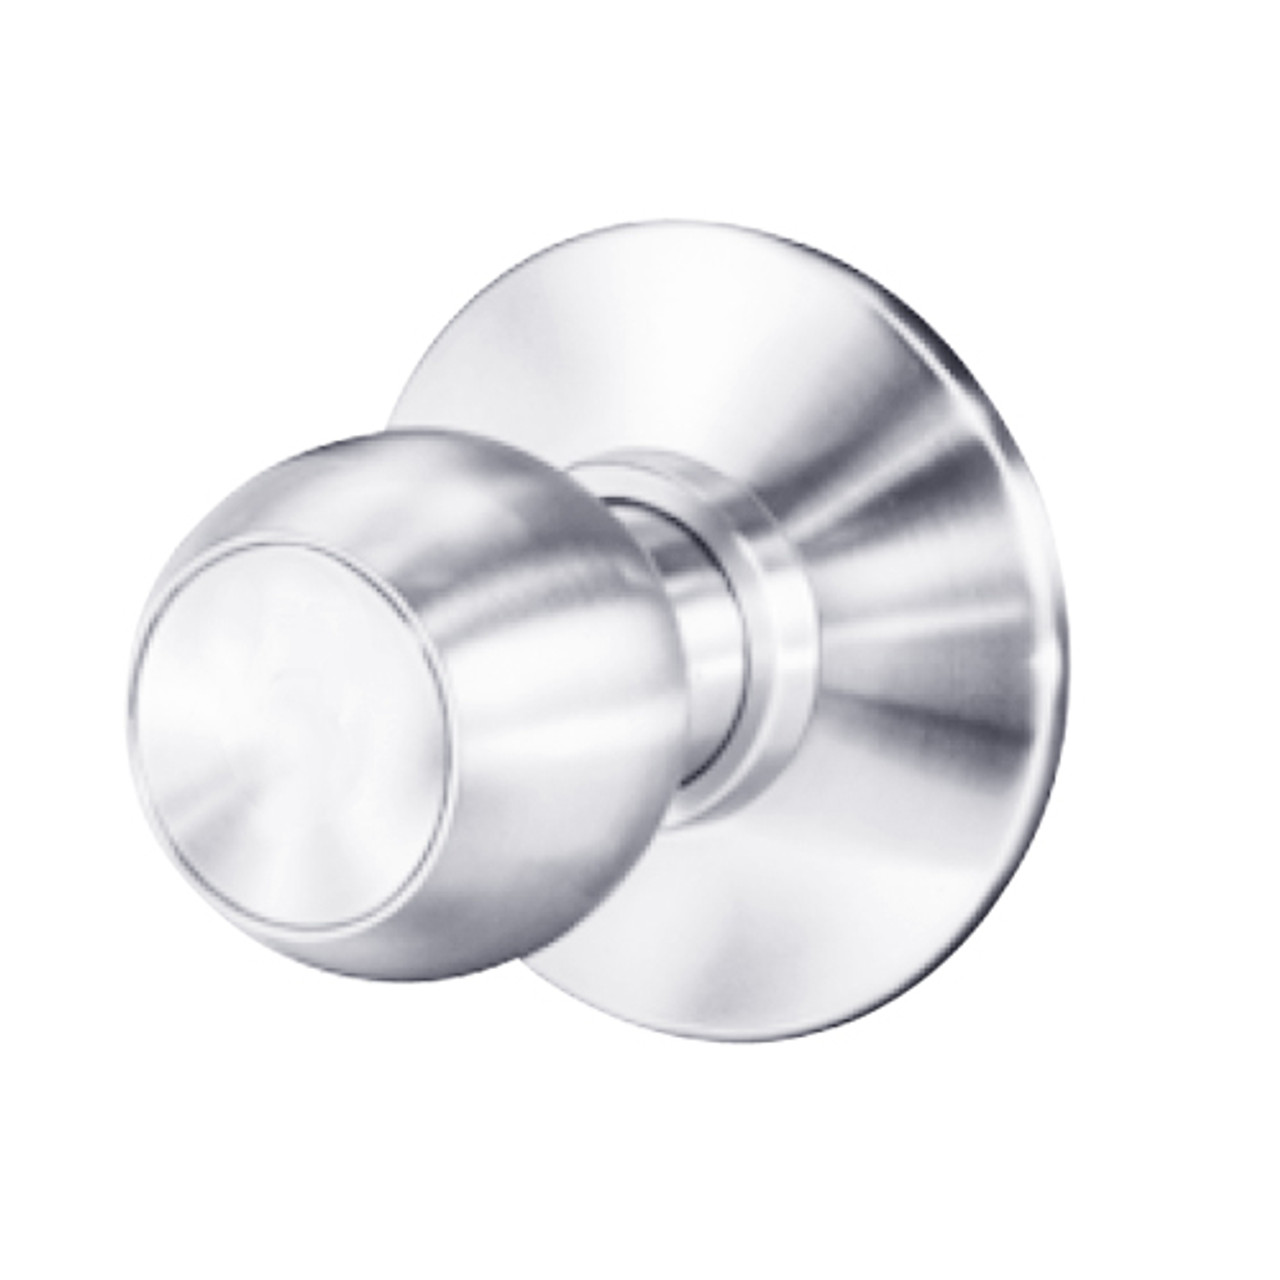 8K30N4DS3625 Best 8K Series Passage Heavy Duty Cylindrical Knob Locks with Round Style in Bright Chrome